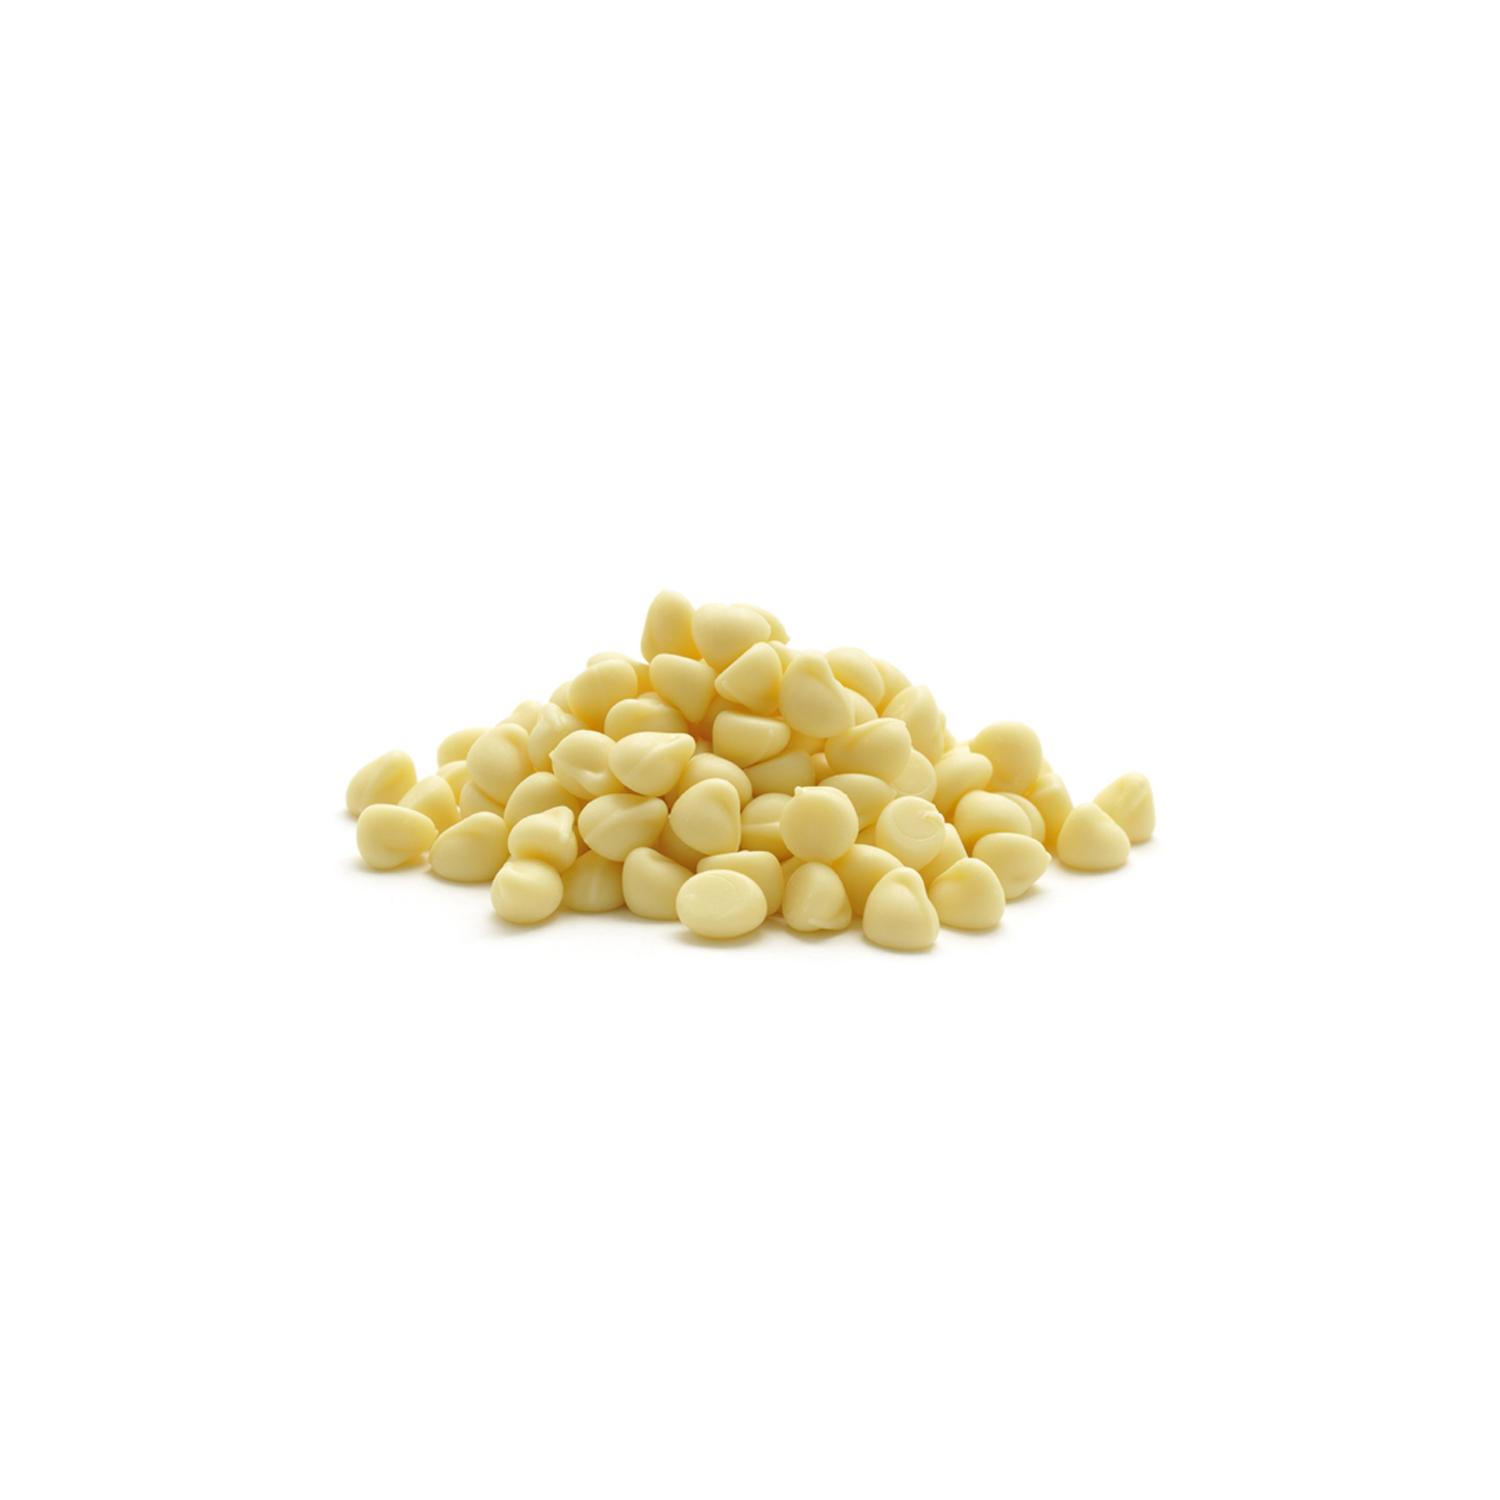 AALST WHITE CHOCOLATE CHIPS 500G